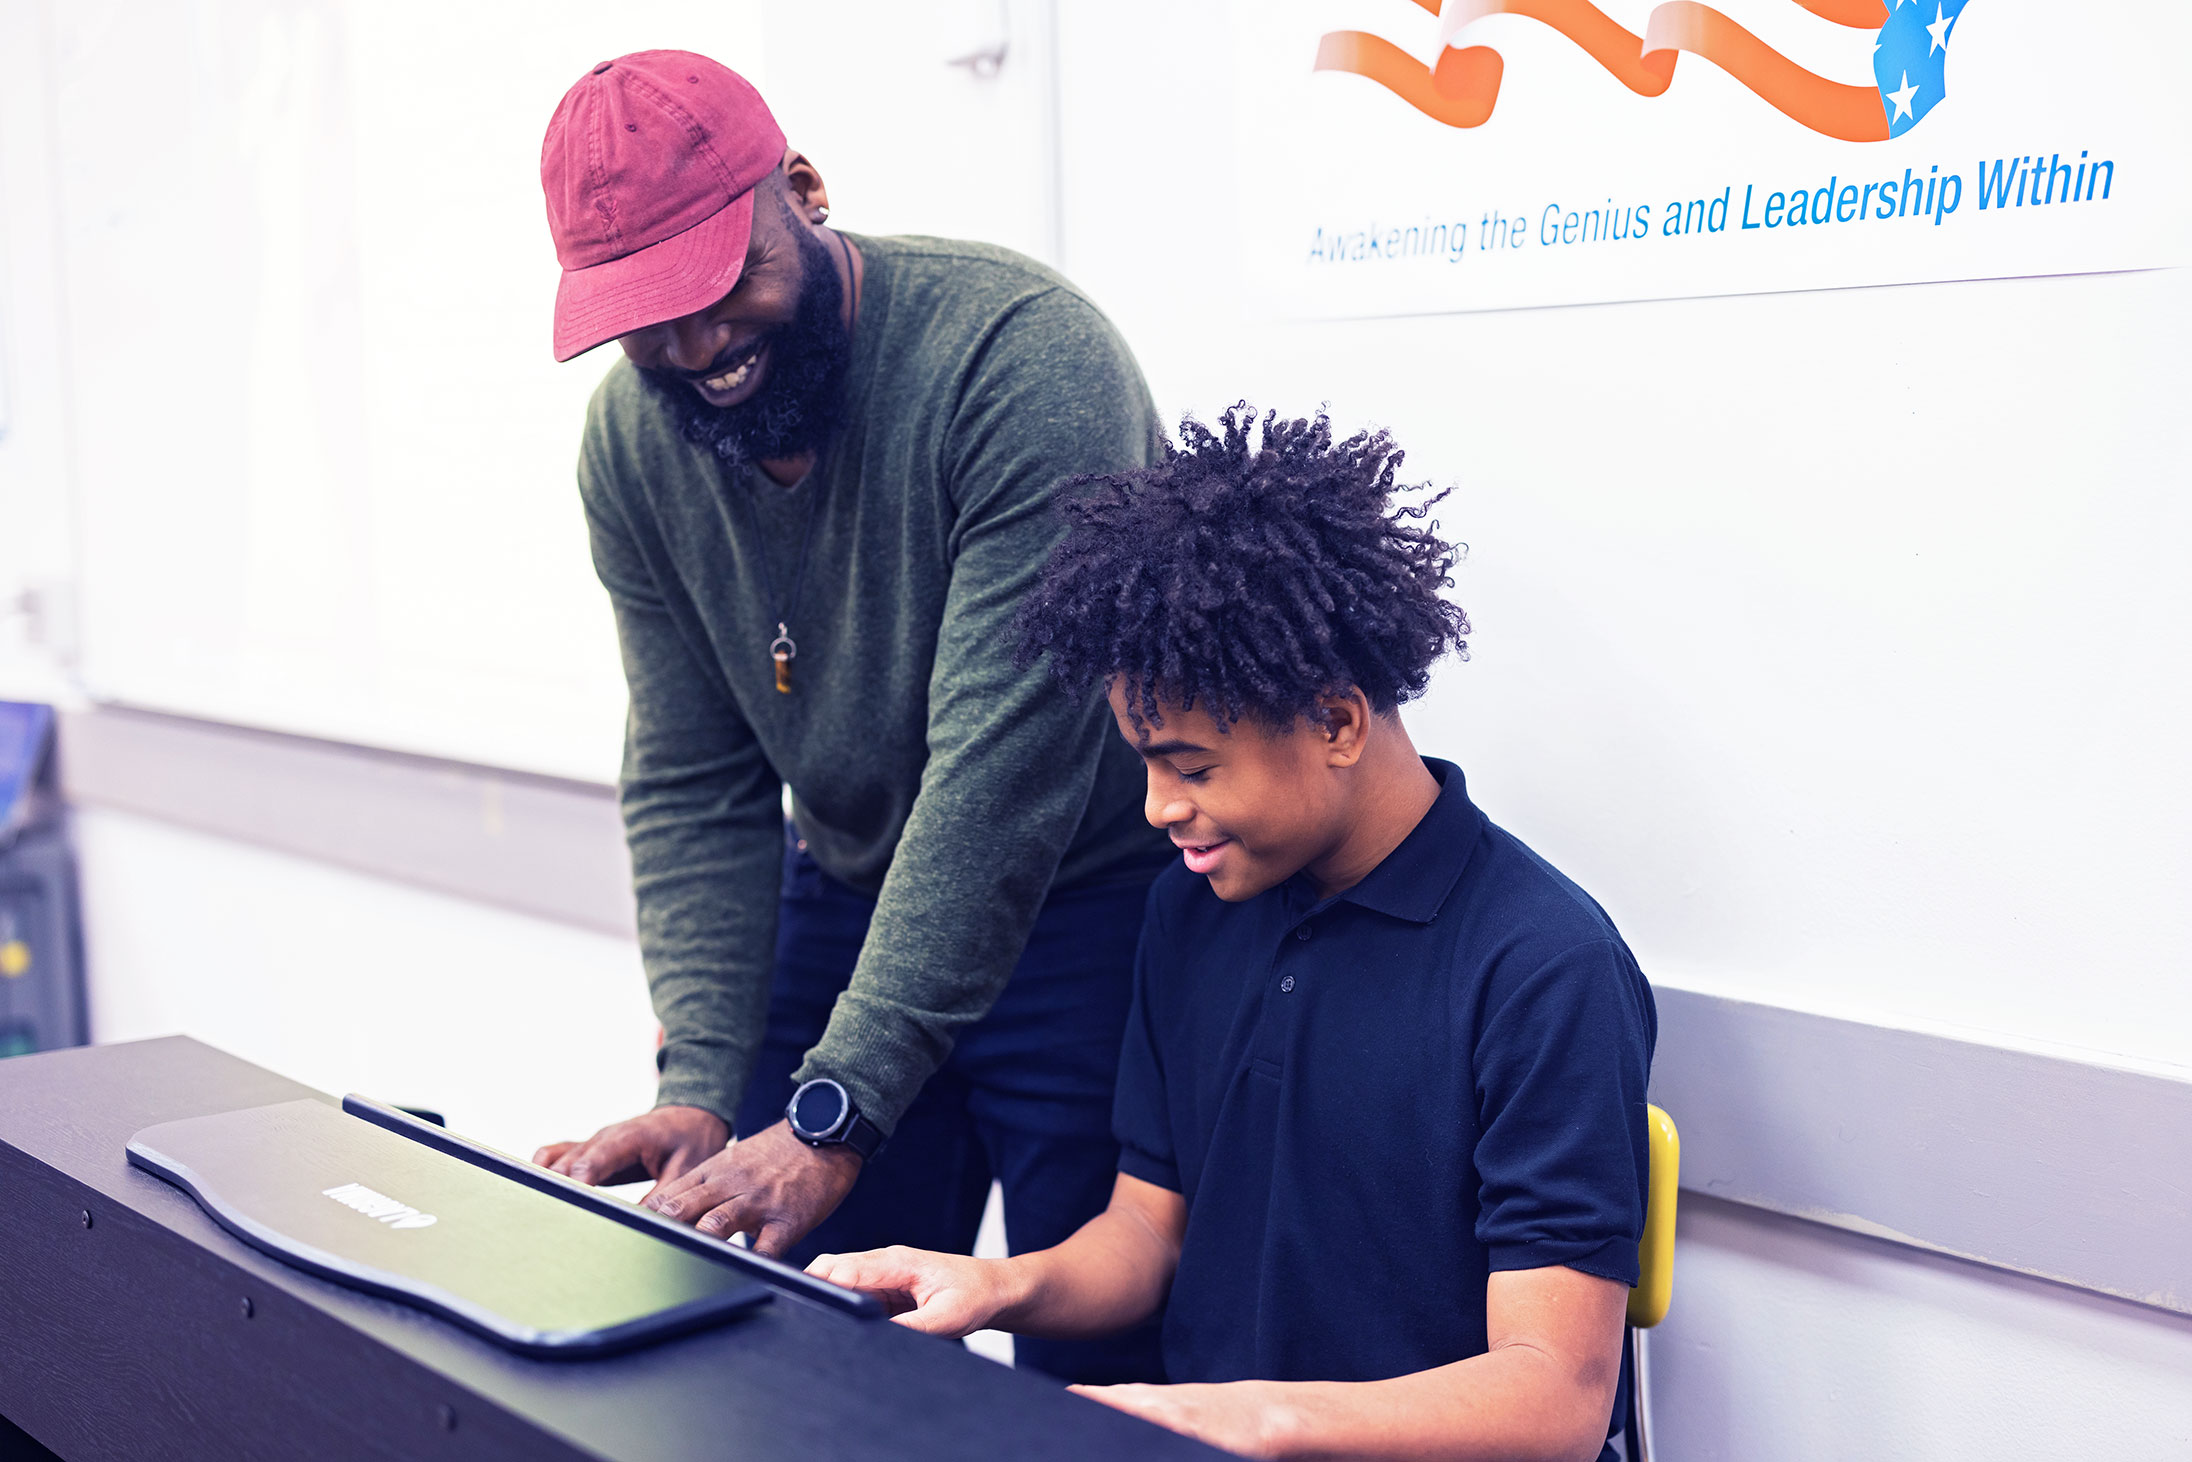 Teacher helping a student play on a keyboard.